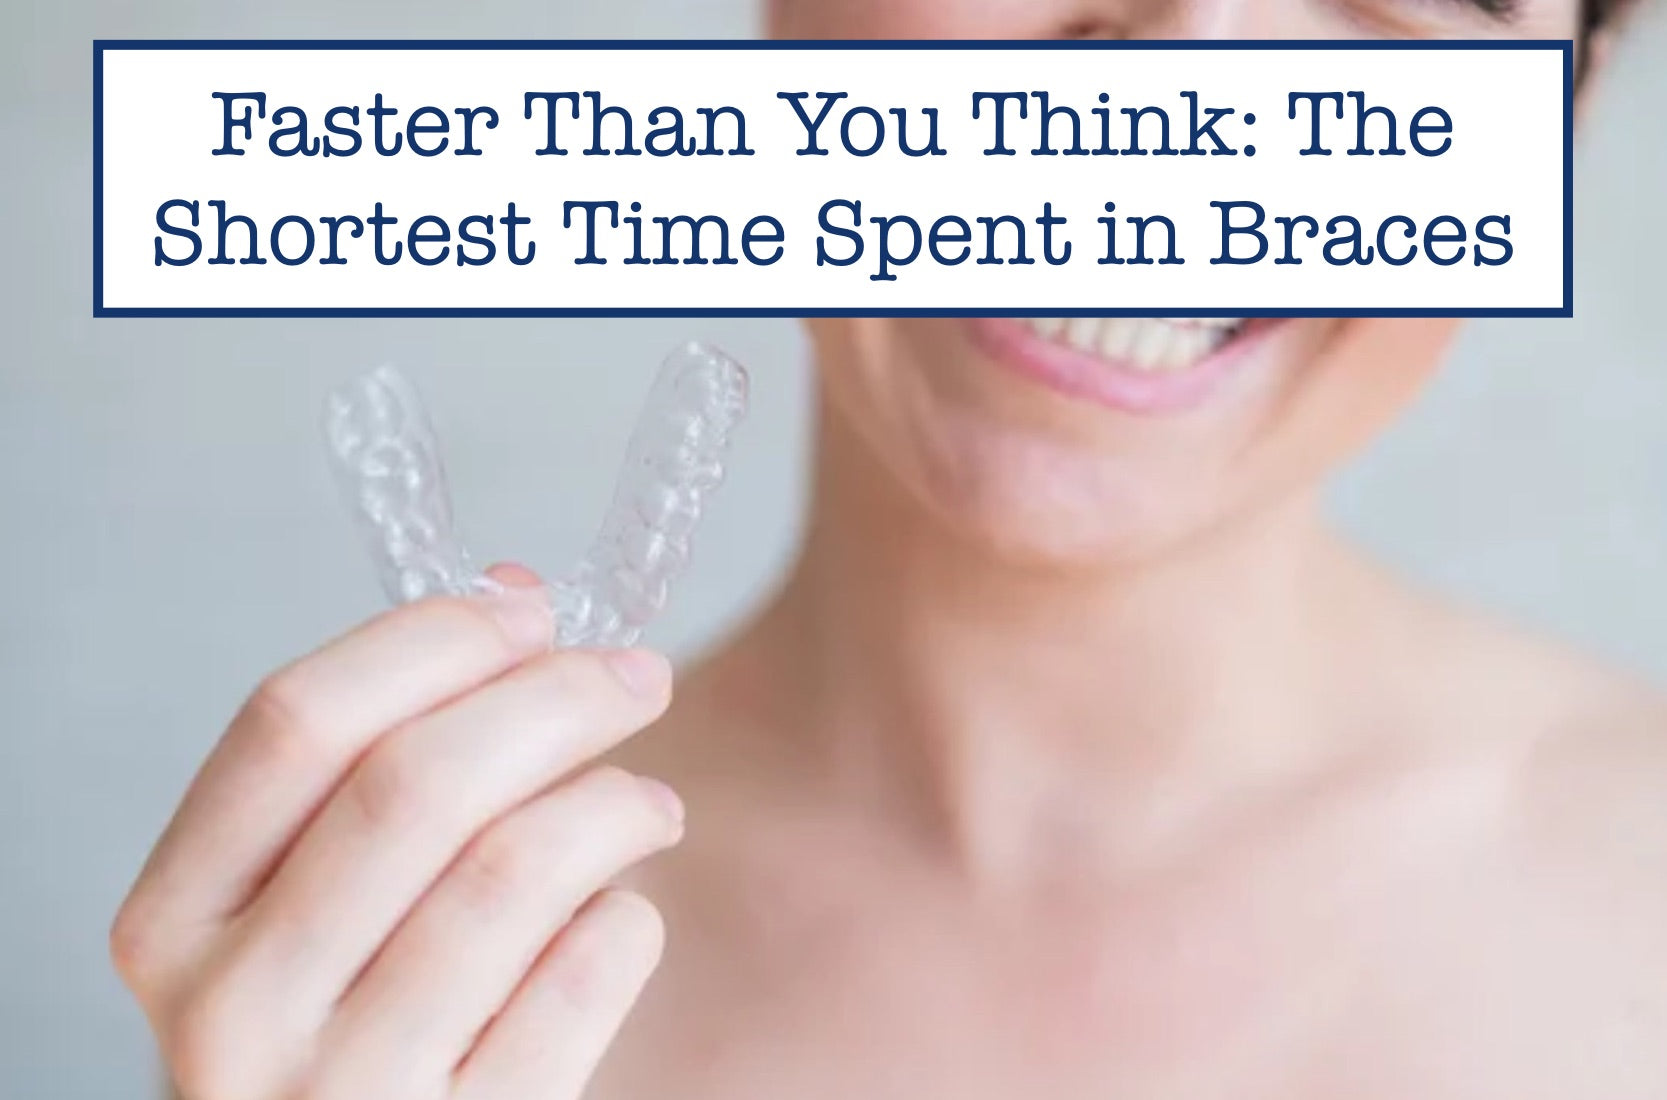 Faster Than You Think: The Shortest Time Spent in Braces